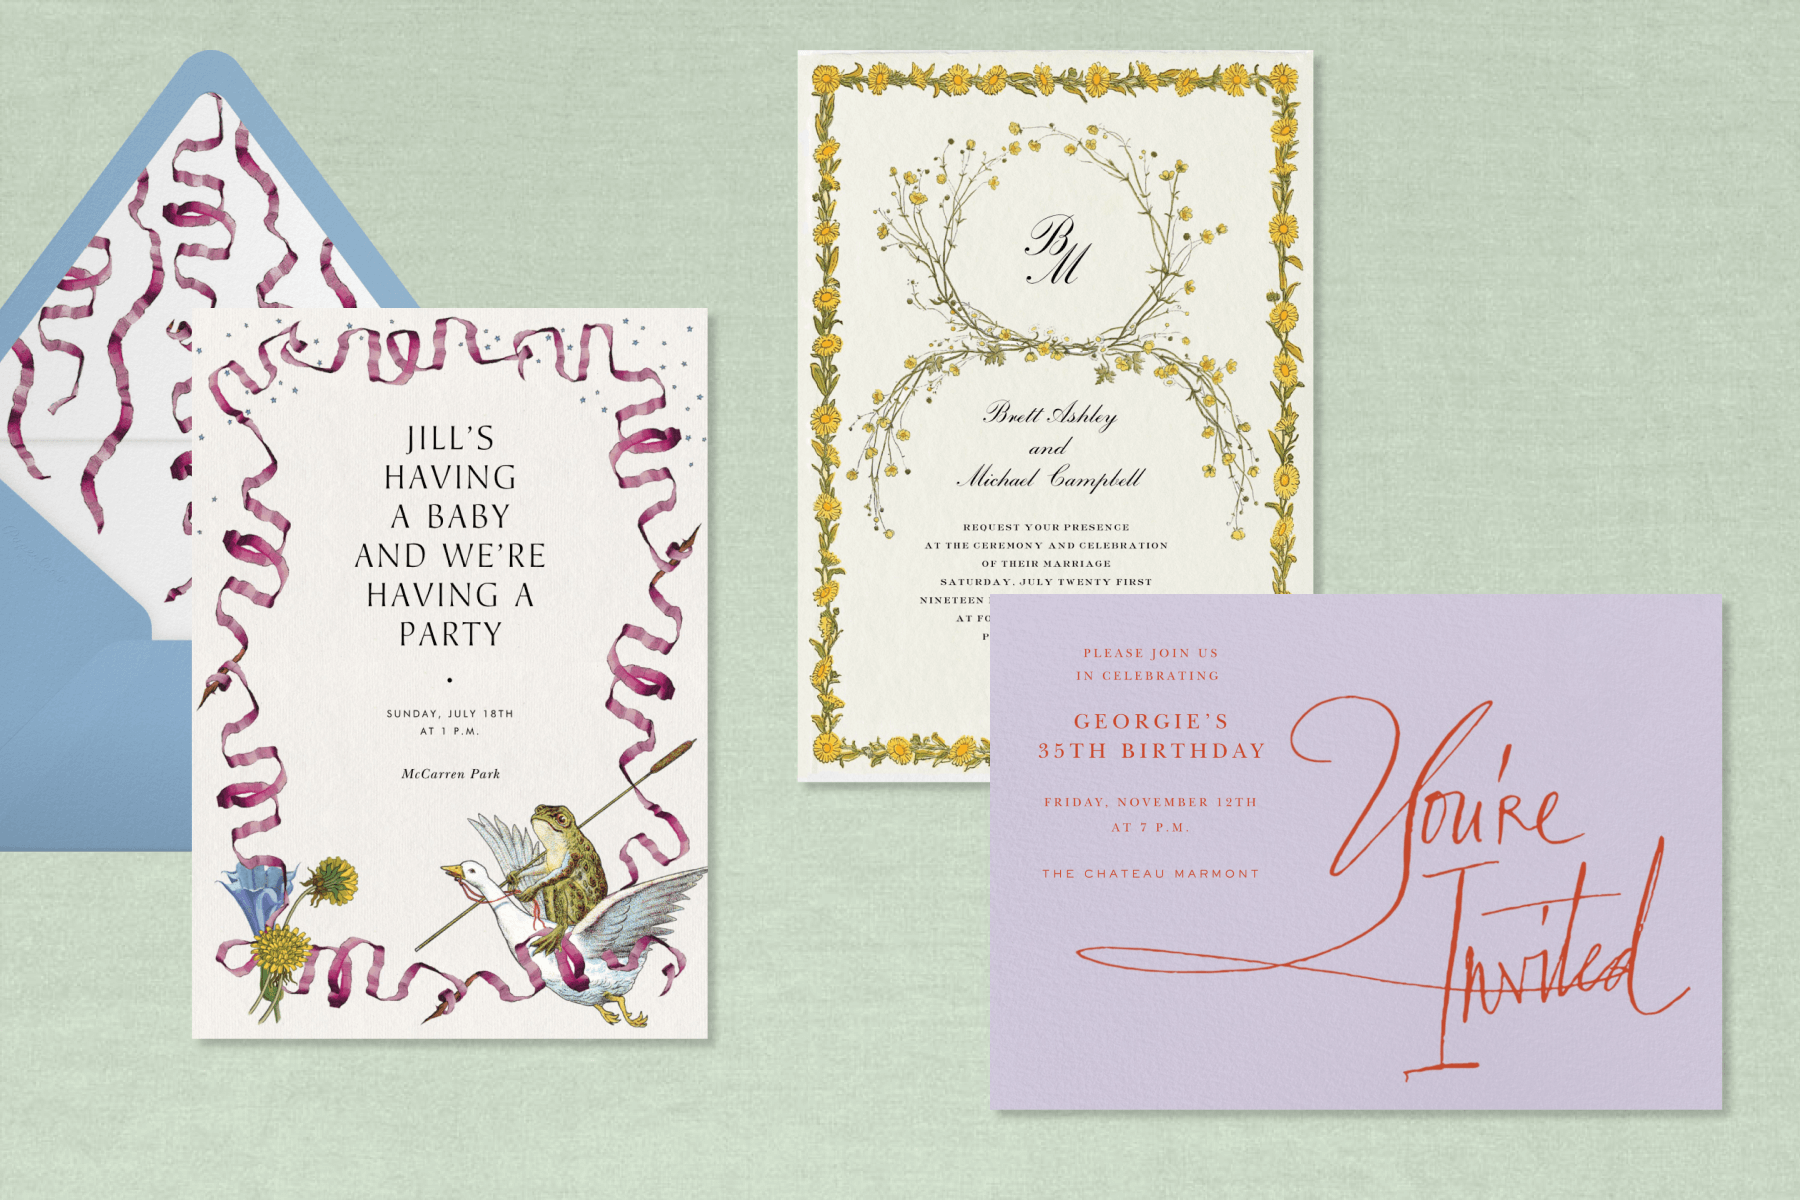 Three Stephanie Fishwick invitations with eclectic designs.